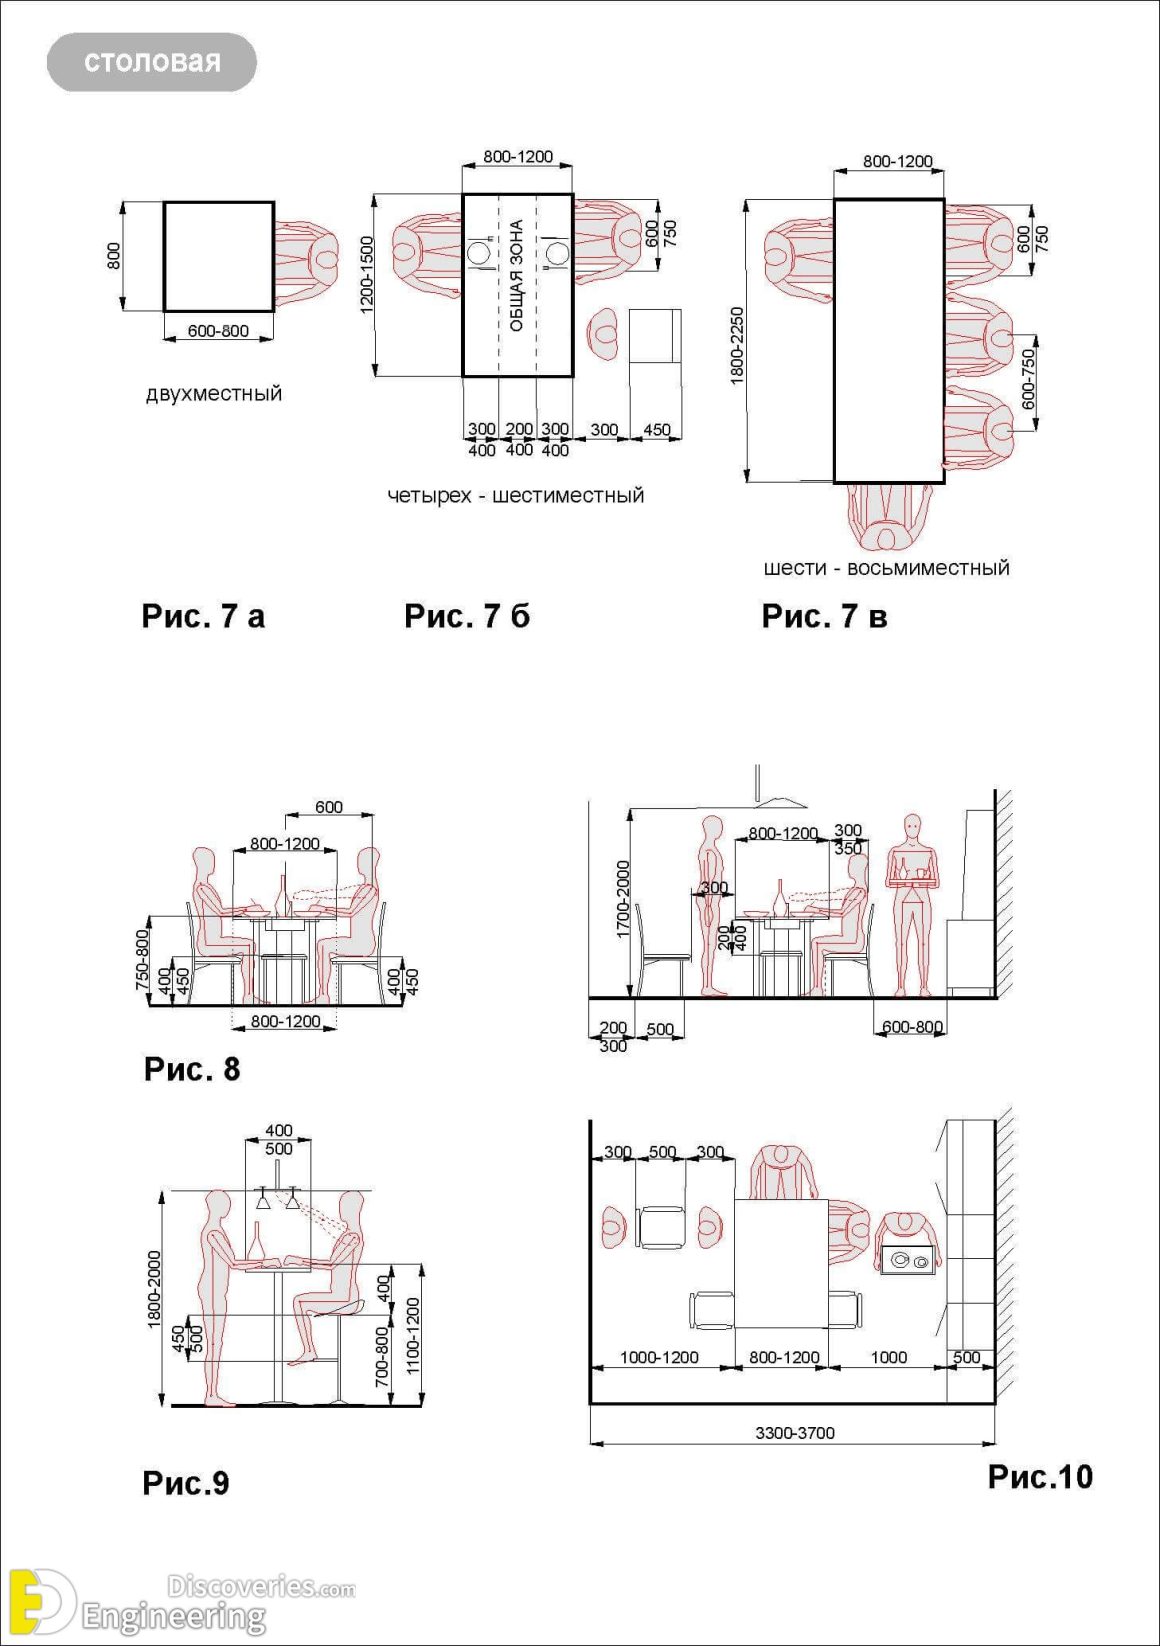 Standard Furniture Dimensions And Layout Guidelines | Engineering ...